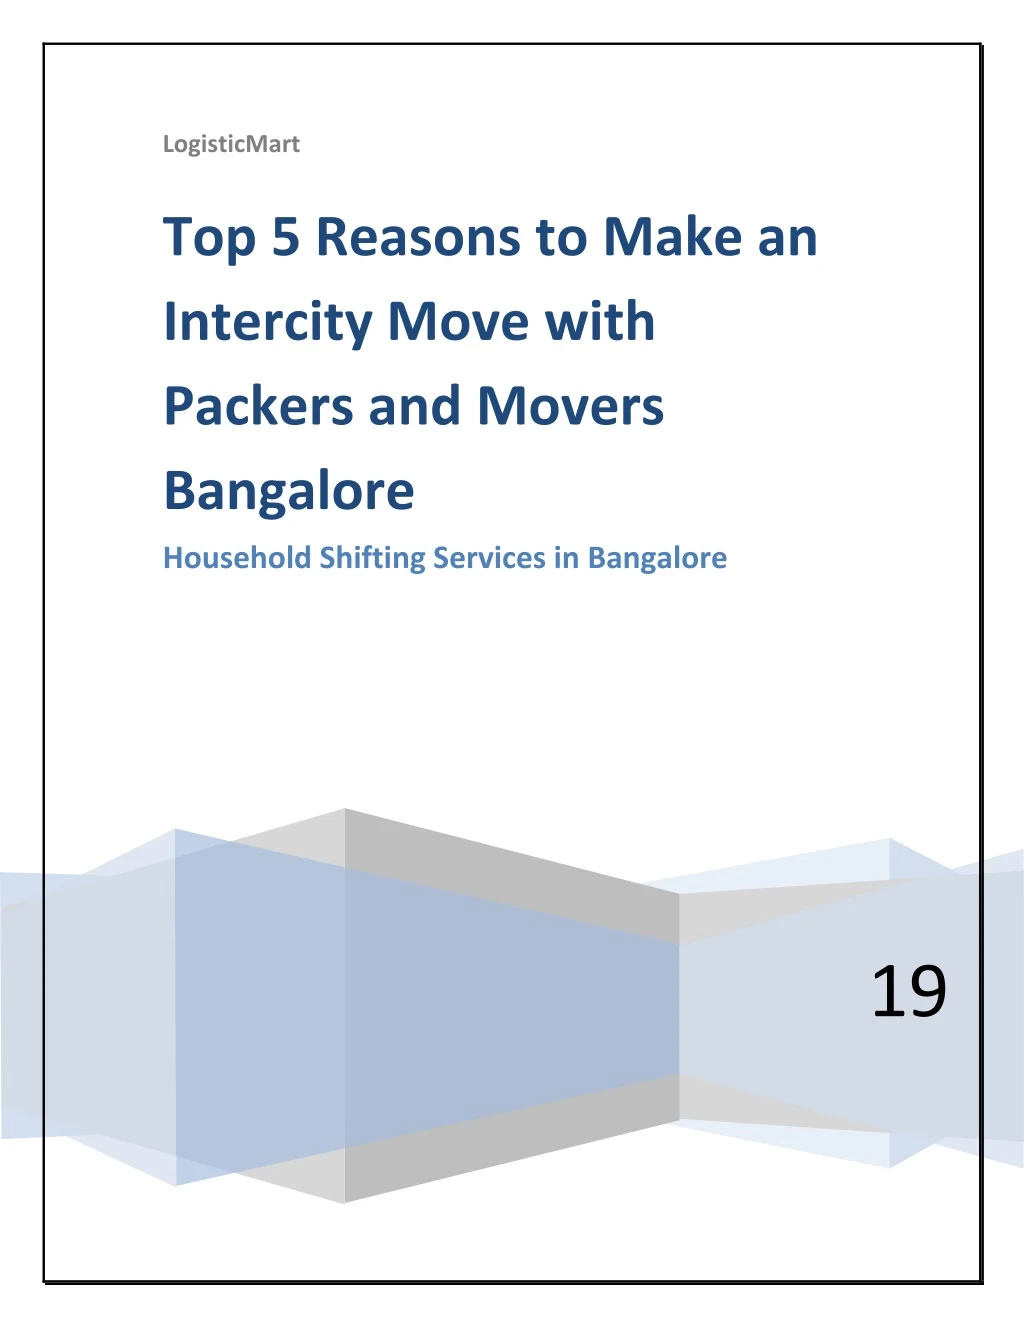 logisticmart top 5 reasons to make an intercity